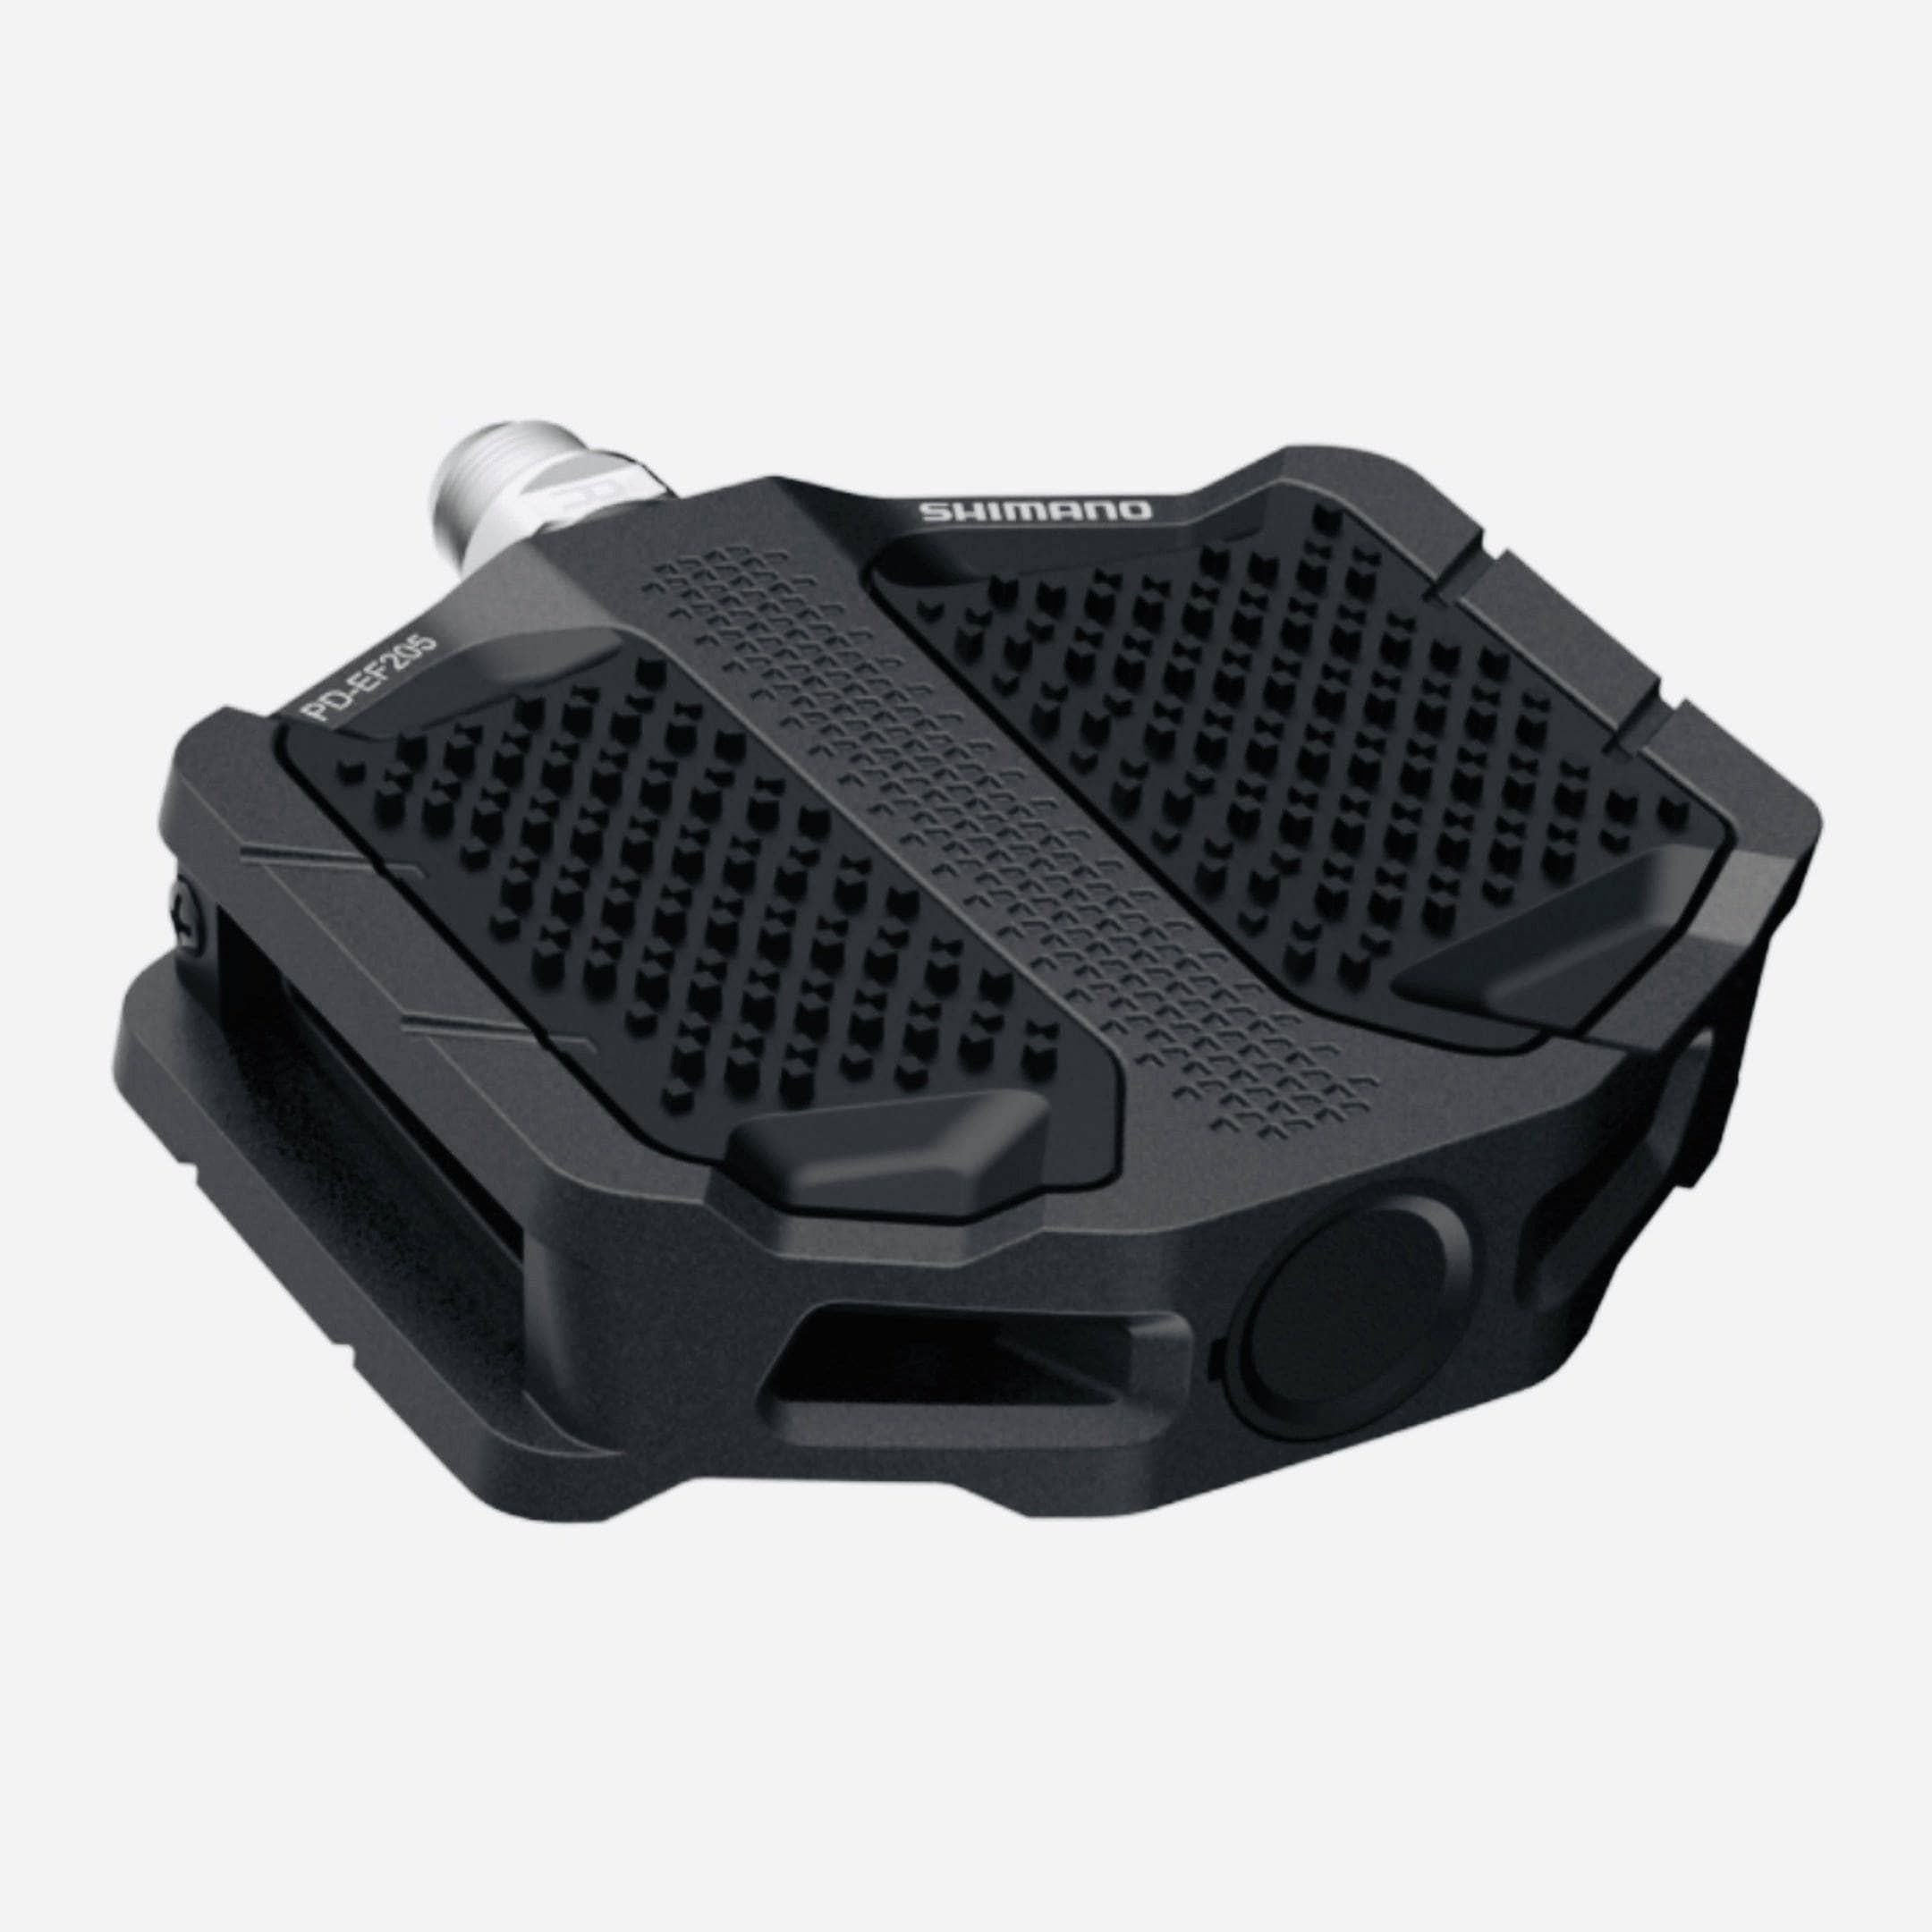 Shimano Shimano PD-EF205 Flat Pedal with Friction Plate Black